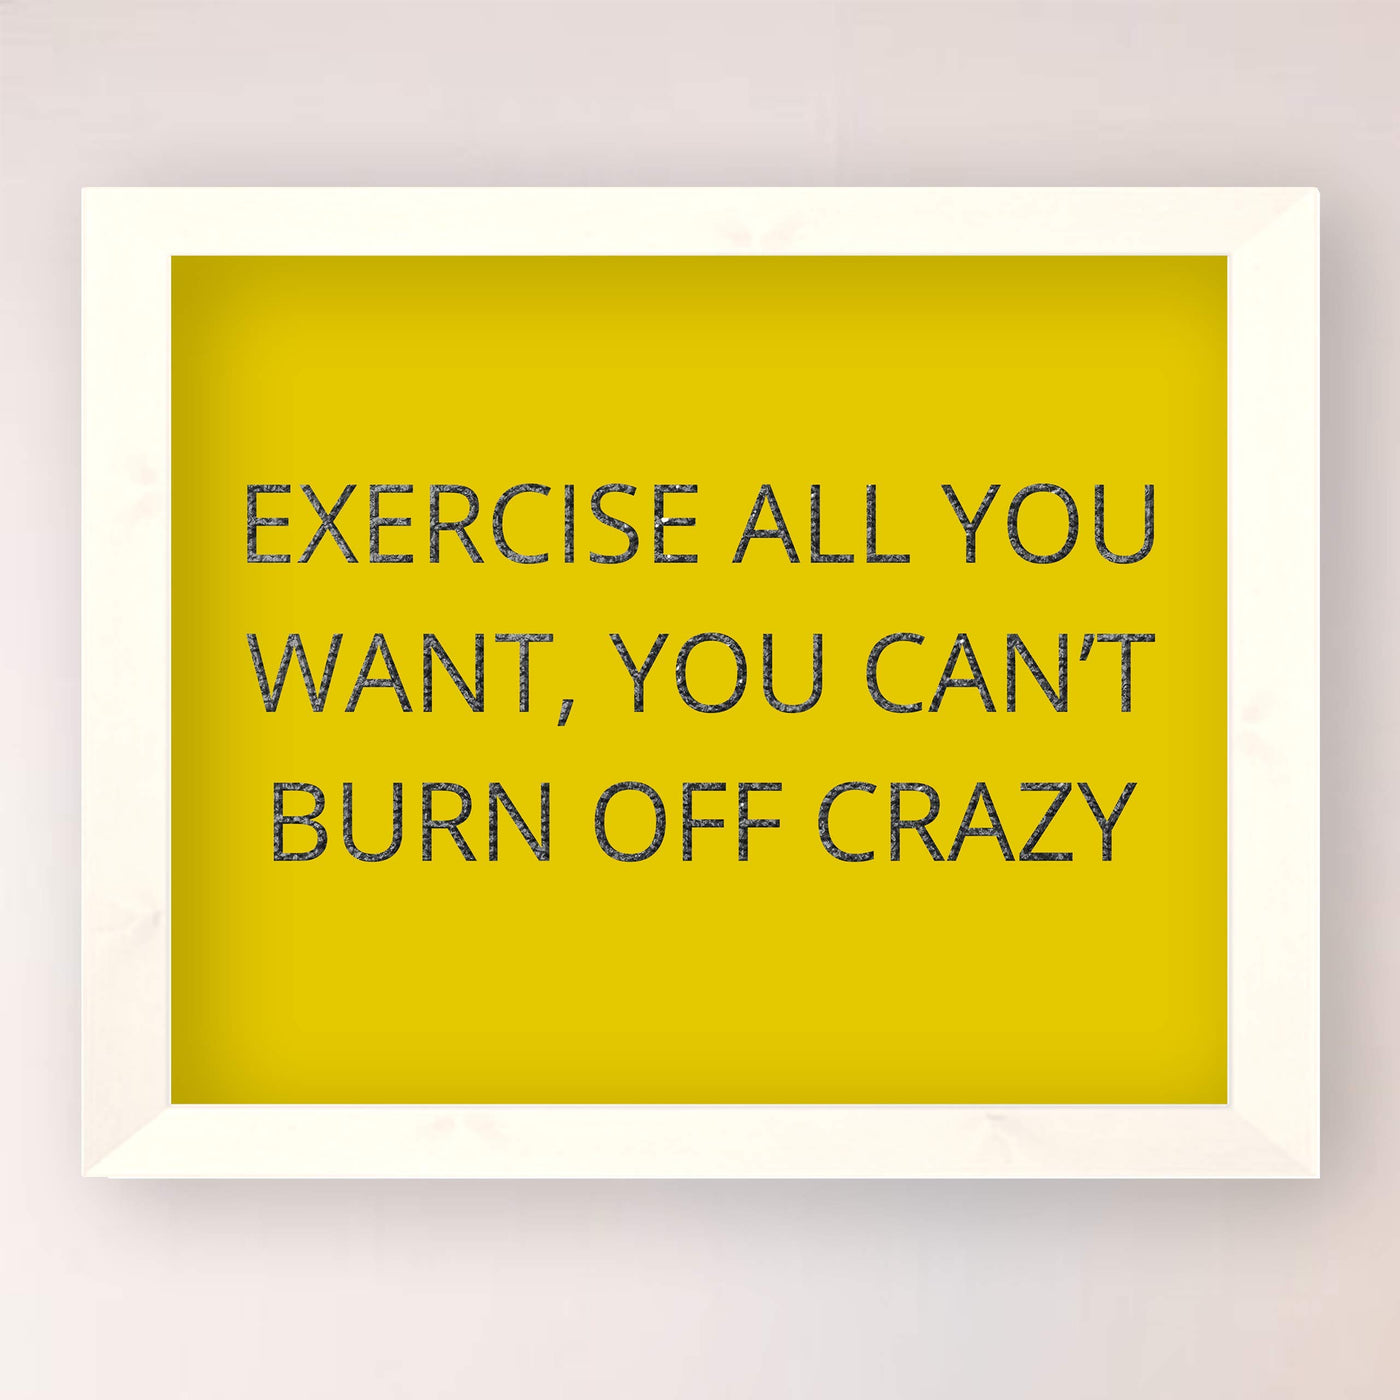 Exercise All You Want-Can't Burn Off Crazy Funny Wall Art Sign-10x8" Humorous Fitness Print-Ready to Frame. Home-Office-Shop-Gym-Locker Room Decor. Fun Novelty Gift for Sarcastic Friends & Family!